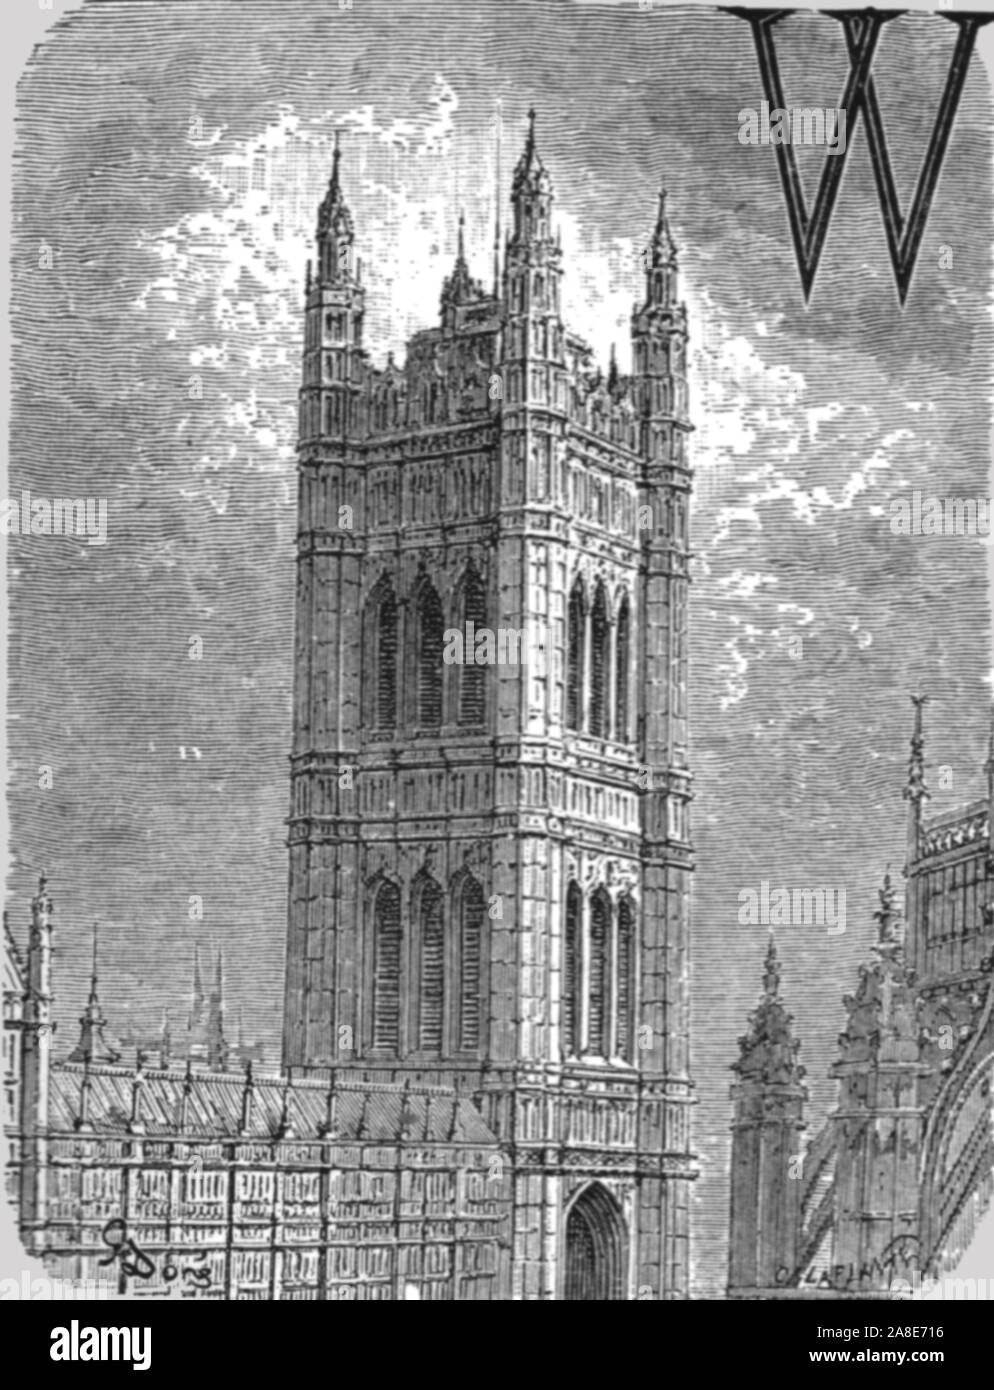 'Victoria Tower', 1872. Victoria Tower in the Palace of Westminster, London was designed by Charles Barry in Perpendicular Gothic style and completed in 1860 as a 'fireproof repository for books and documents'. From, &quot;LONDON. A Pilgrimage&quot; by Gustave Dore and Blanchard Jerrold. [Grant and Co., 72-78, Turnmill Street, E.C., 1872]. Stock Photo